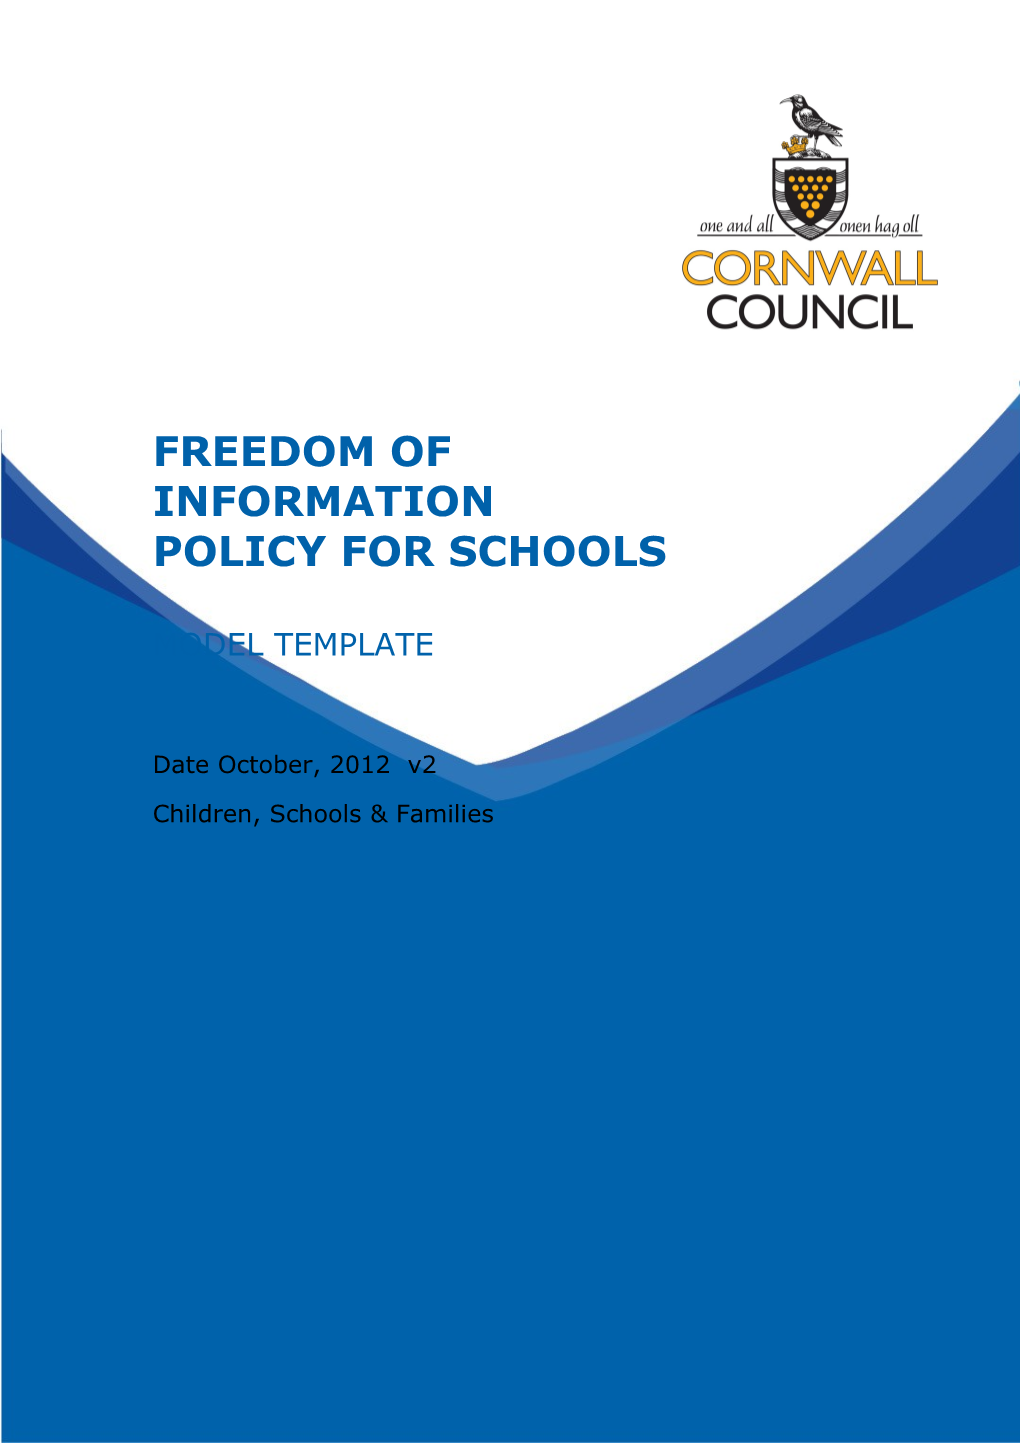 Draft Model Policy for Schools